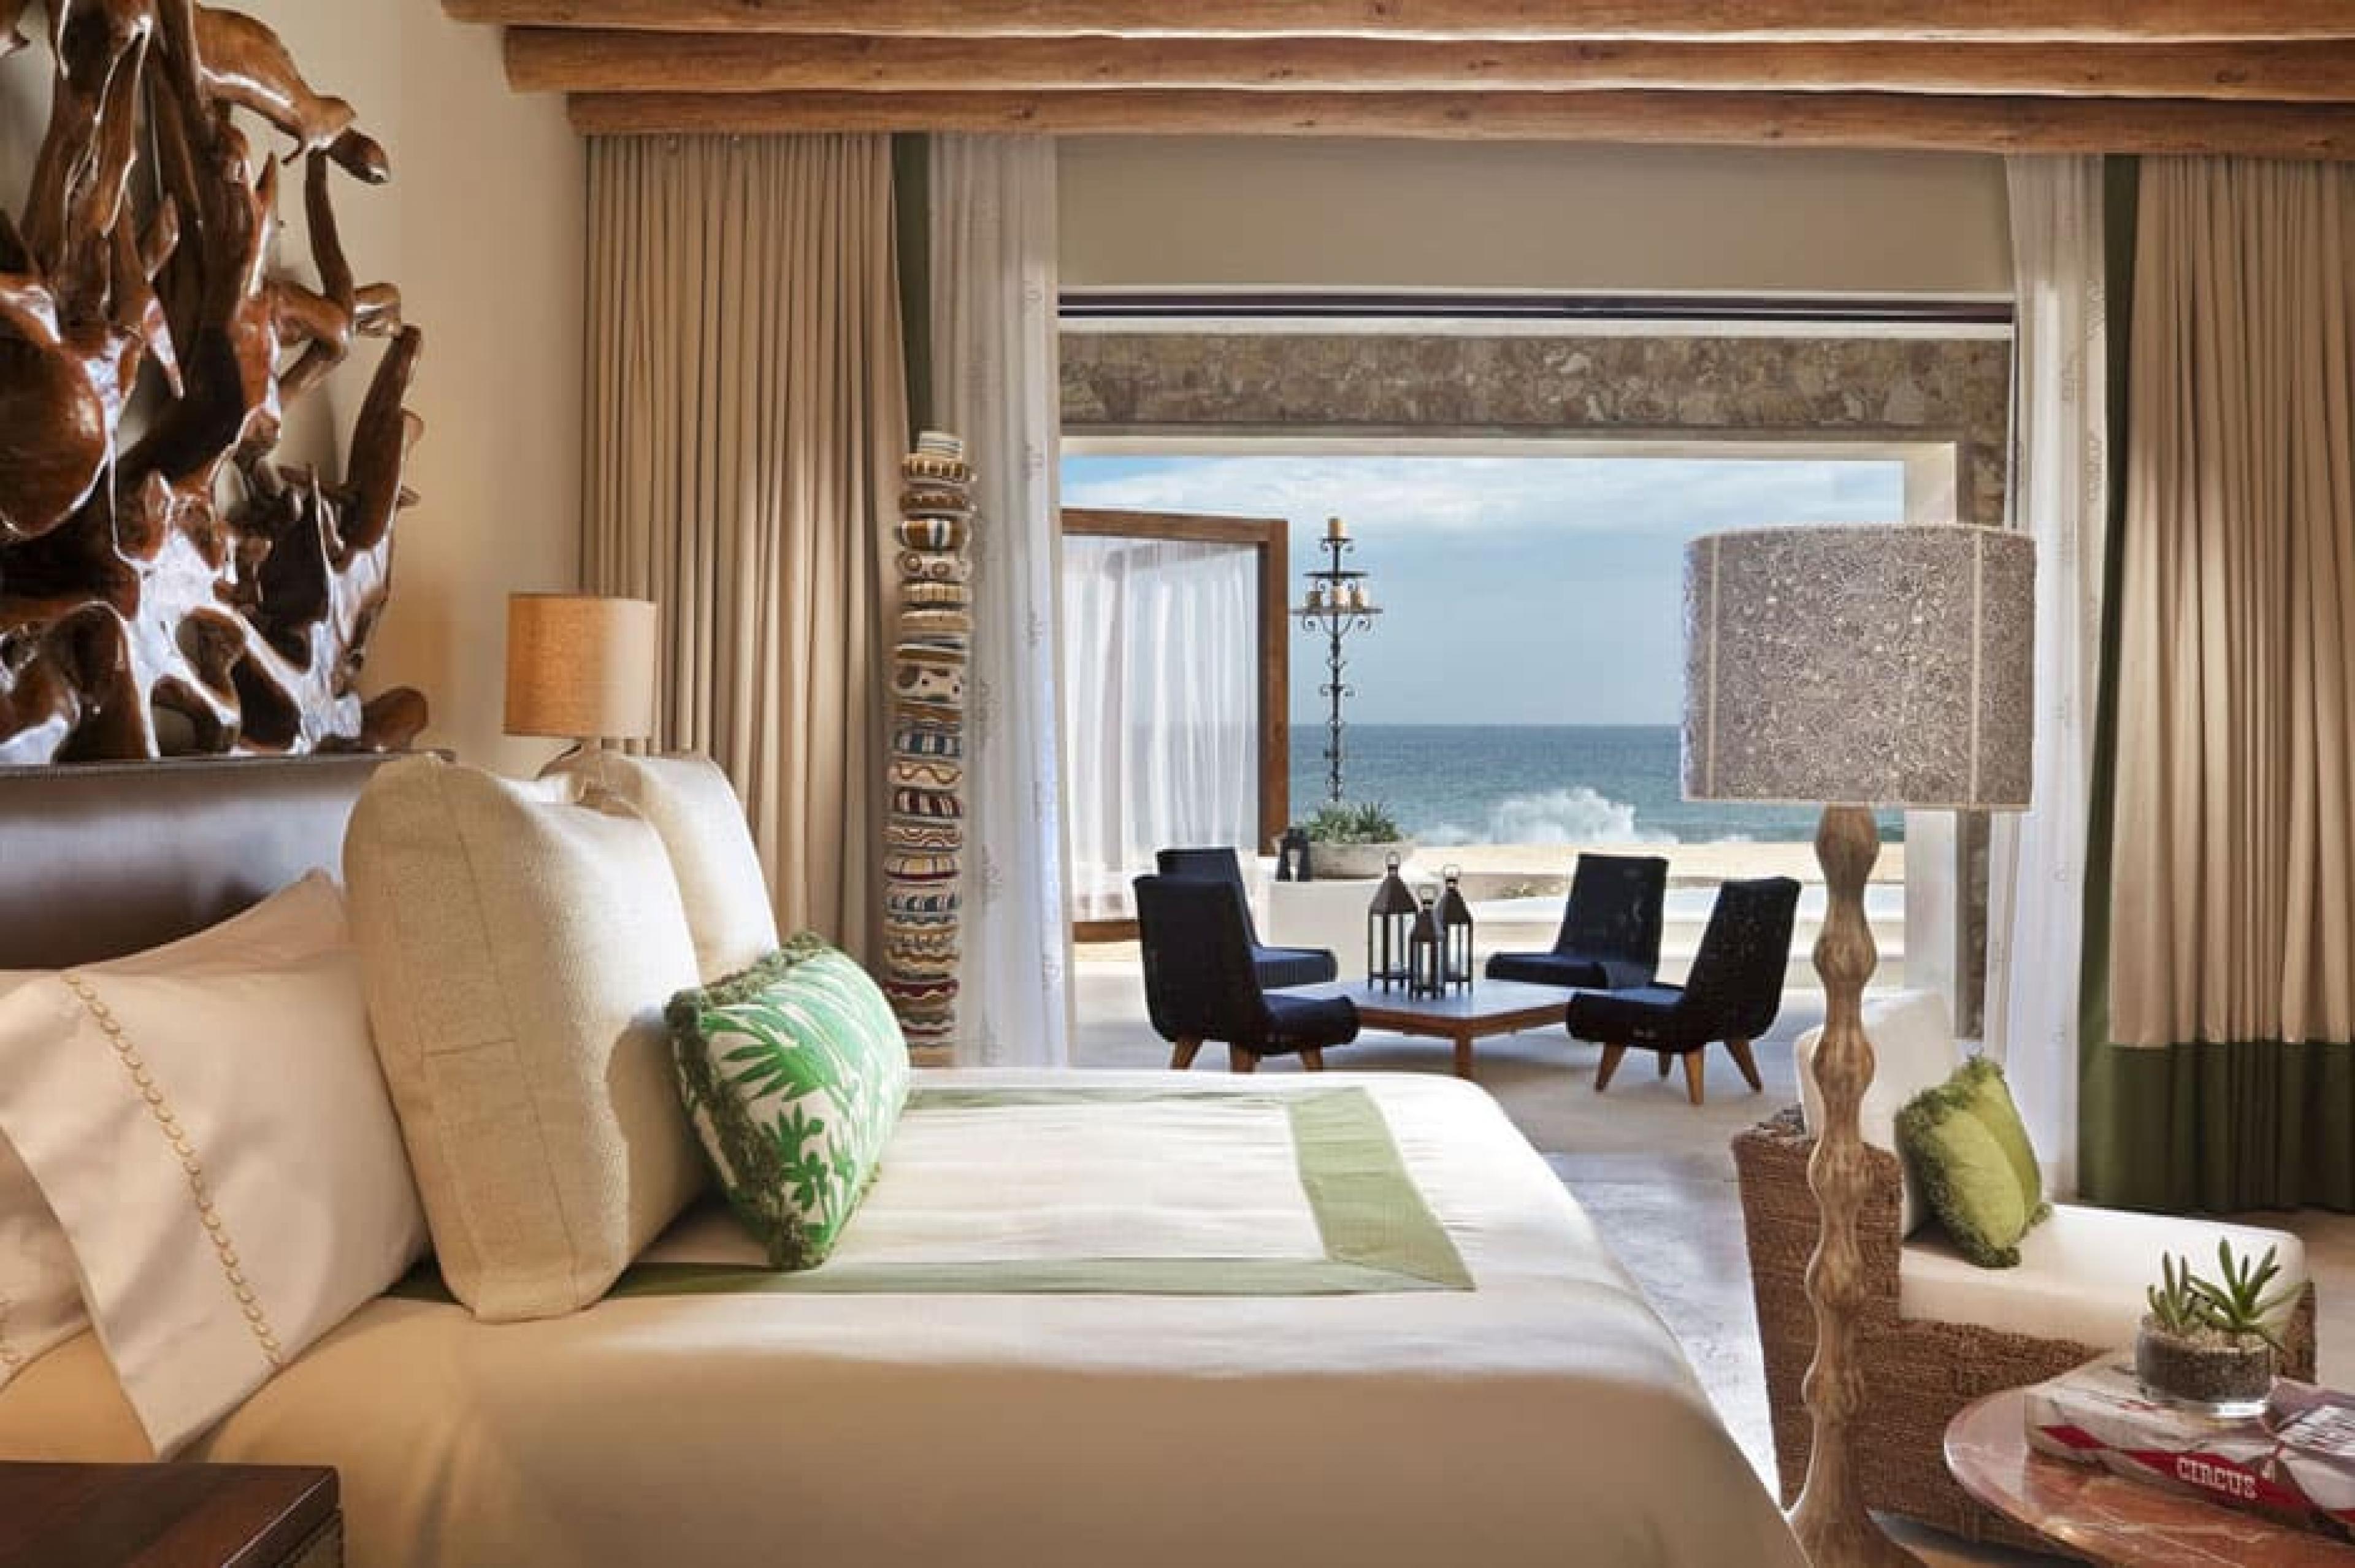 Presidential Suite at The Resort at Pedregal, Los Cabos, Mexico